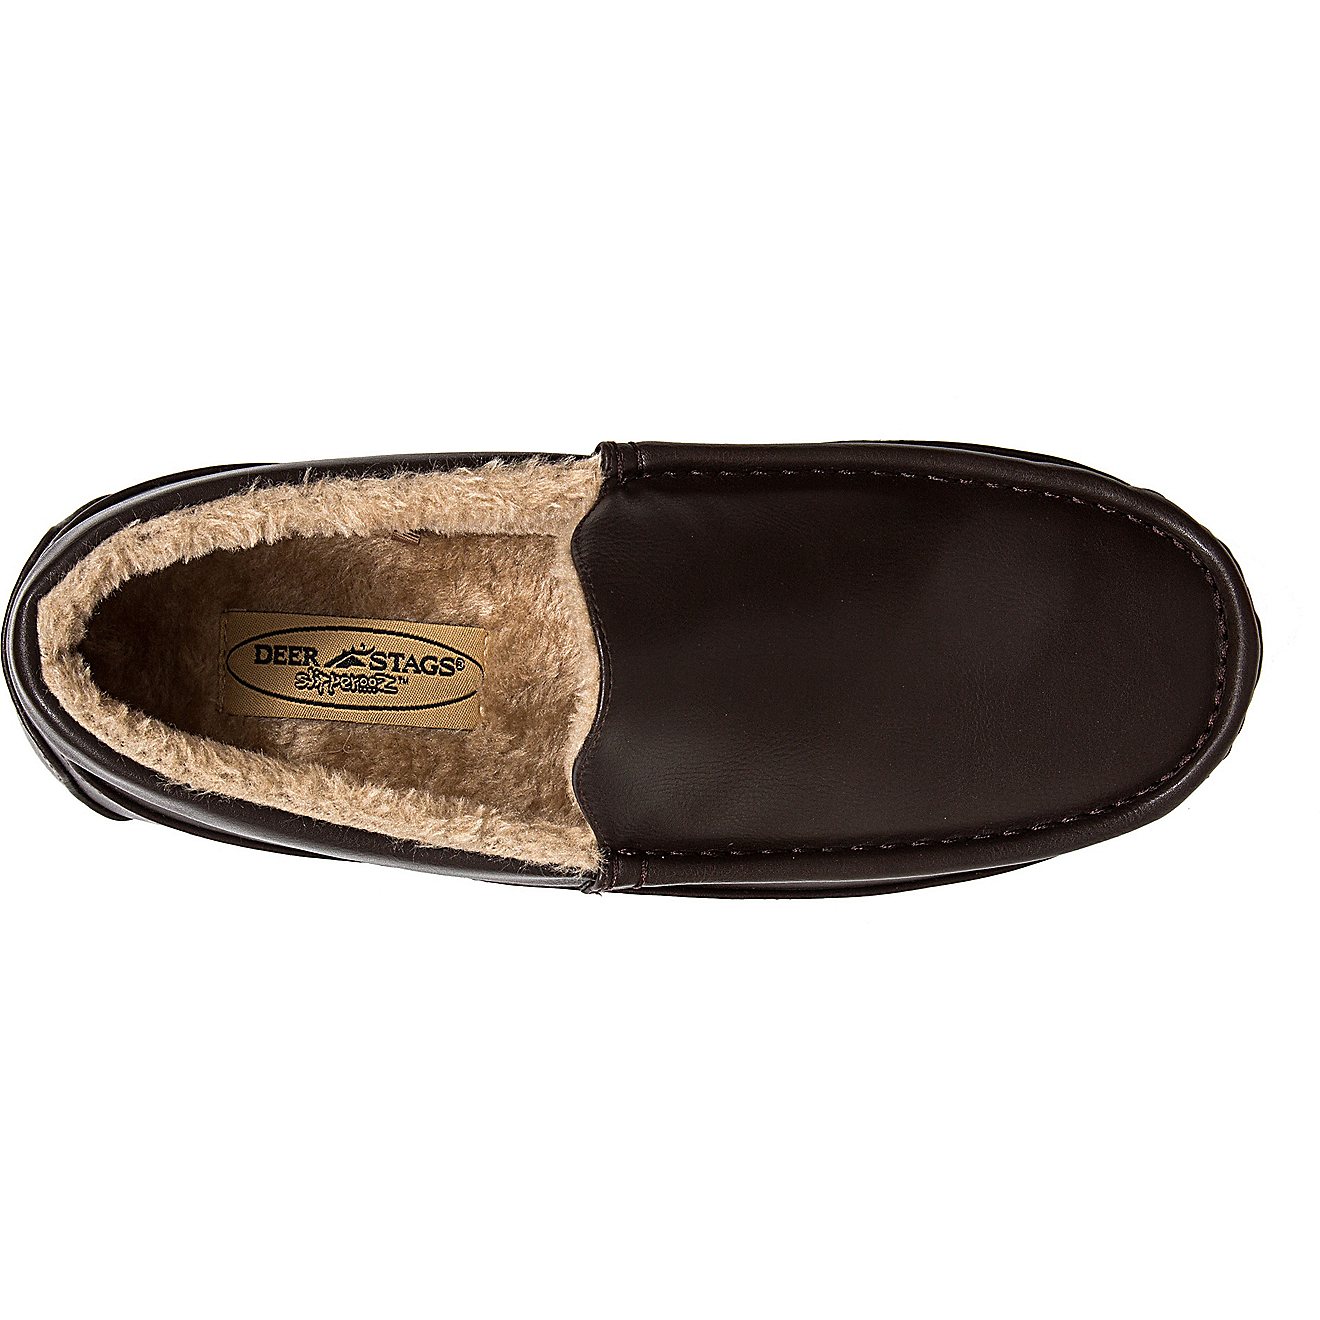 Deer Stags Men’s Slipperooz Moccasin Slippers                                                                                  - view number 5